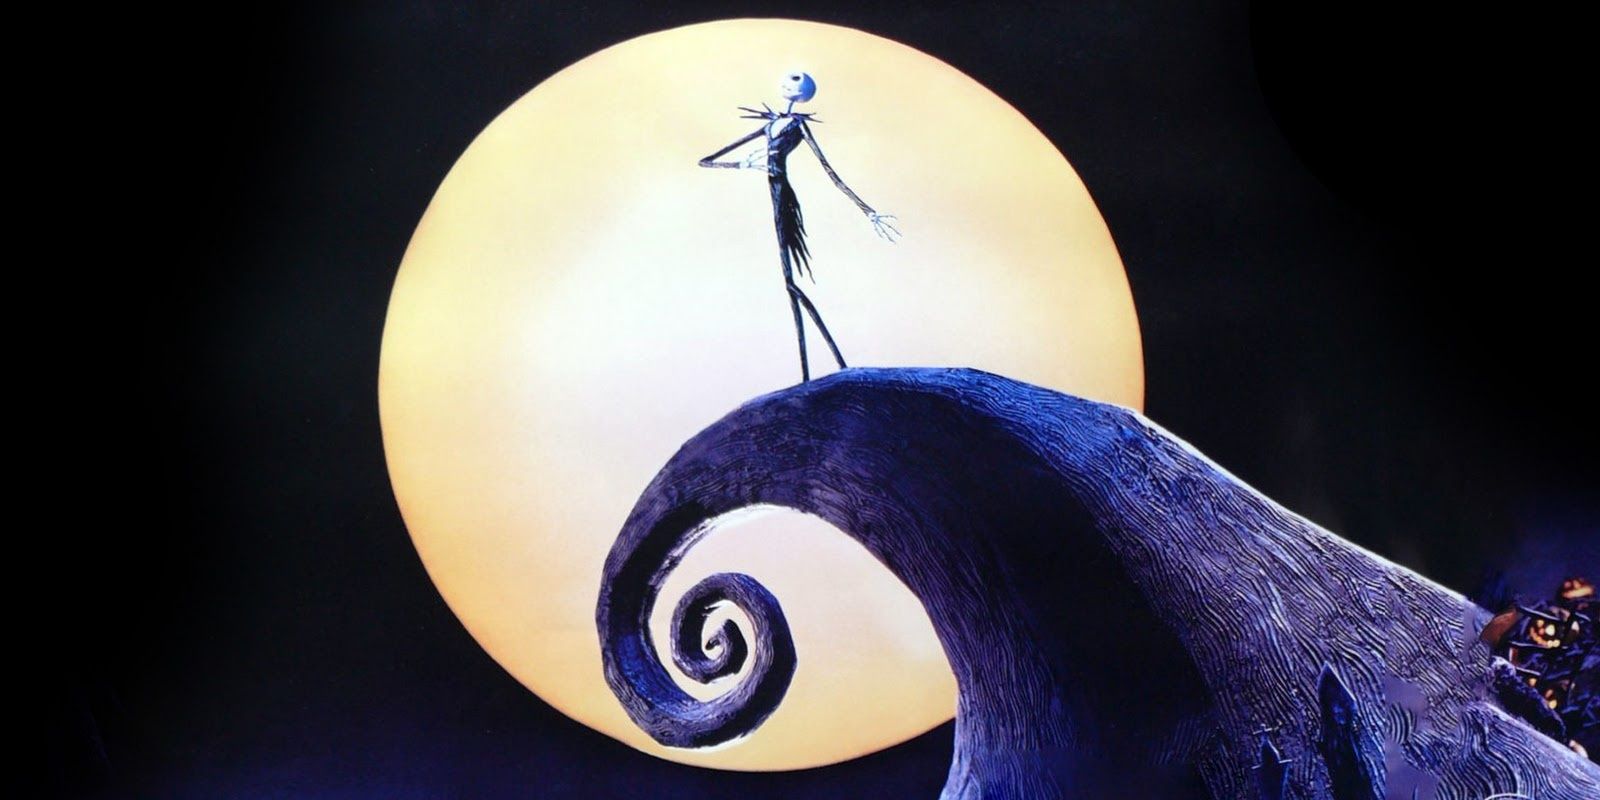 Jack Skellington on a hill in The Nightmare Before Christmas